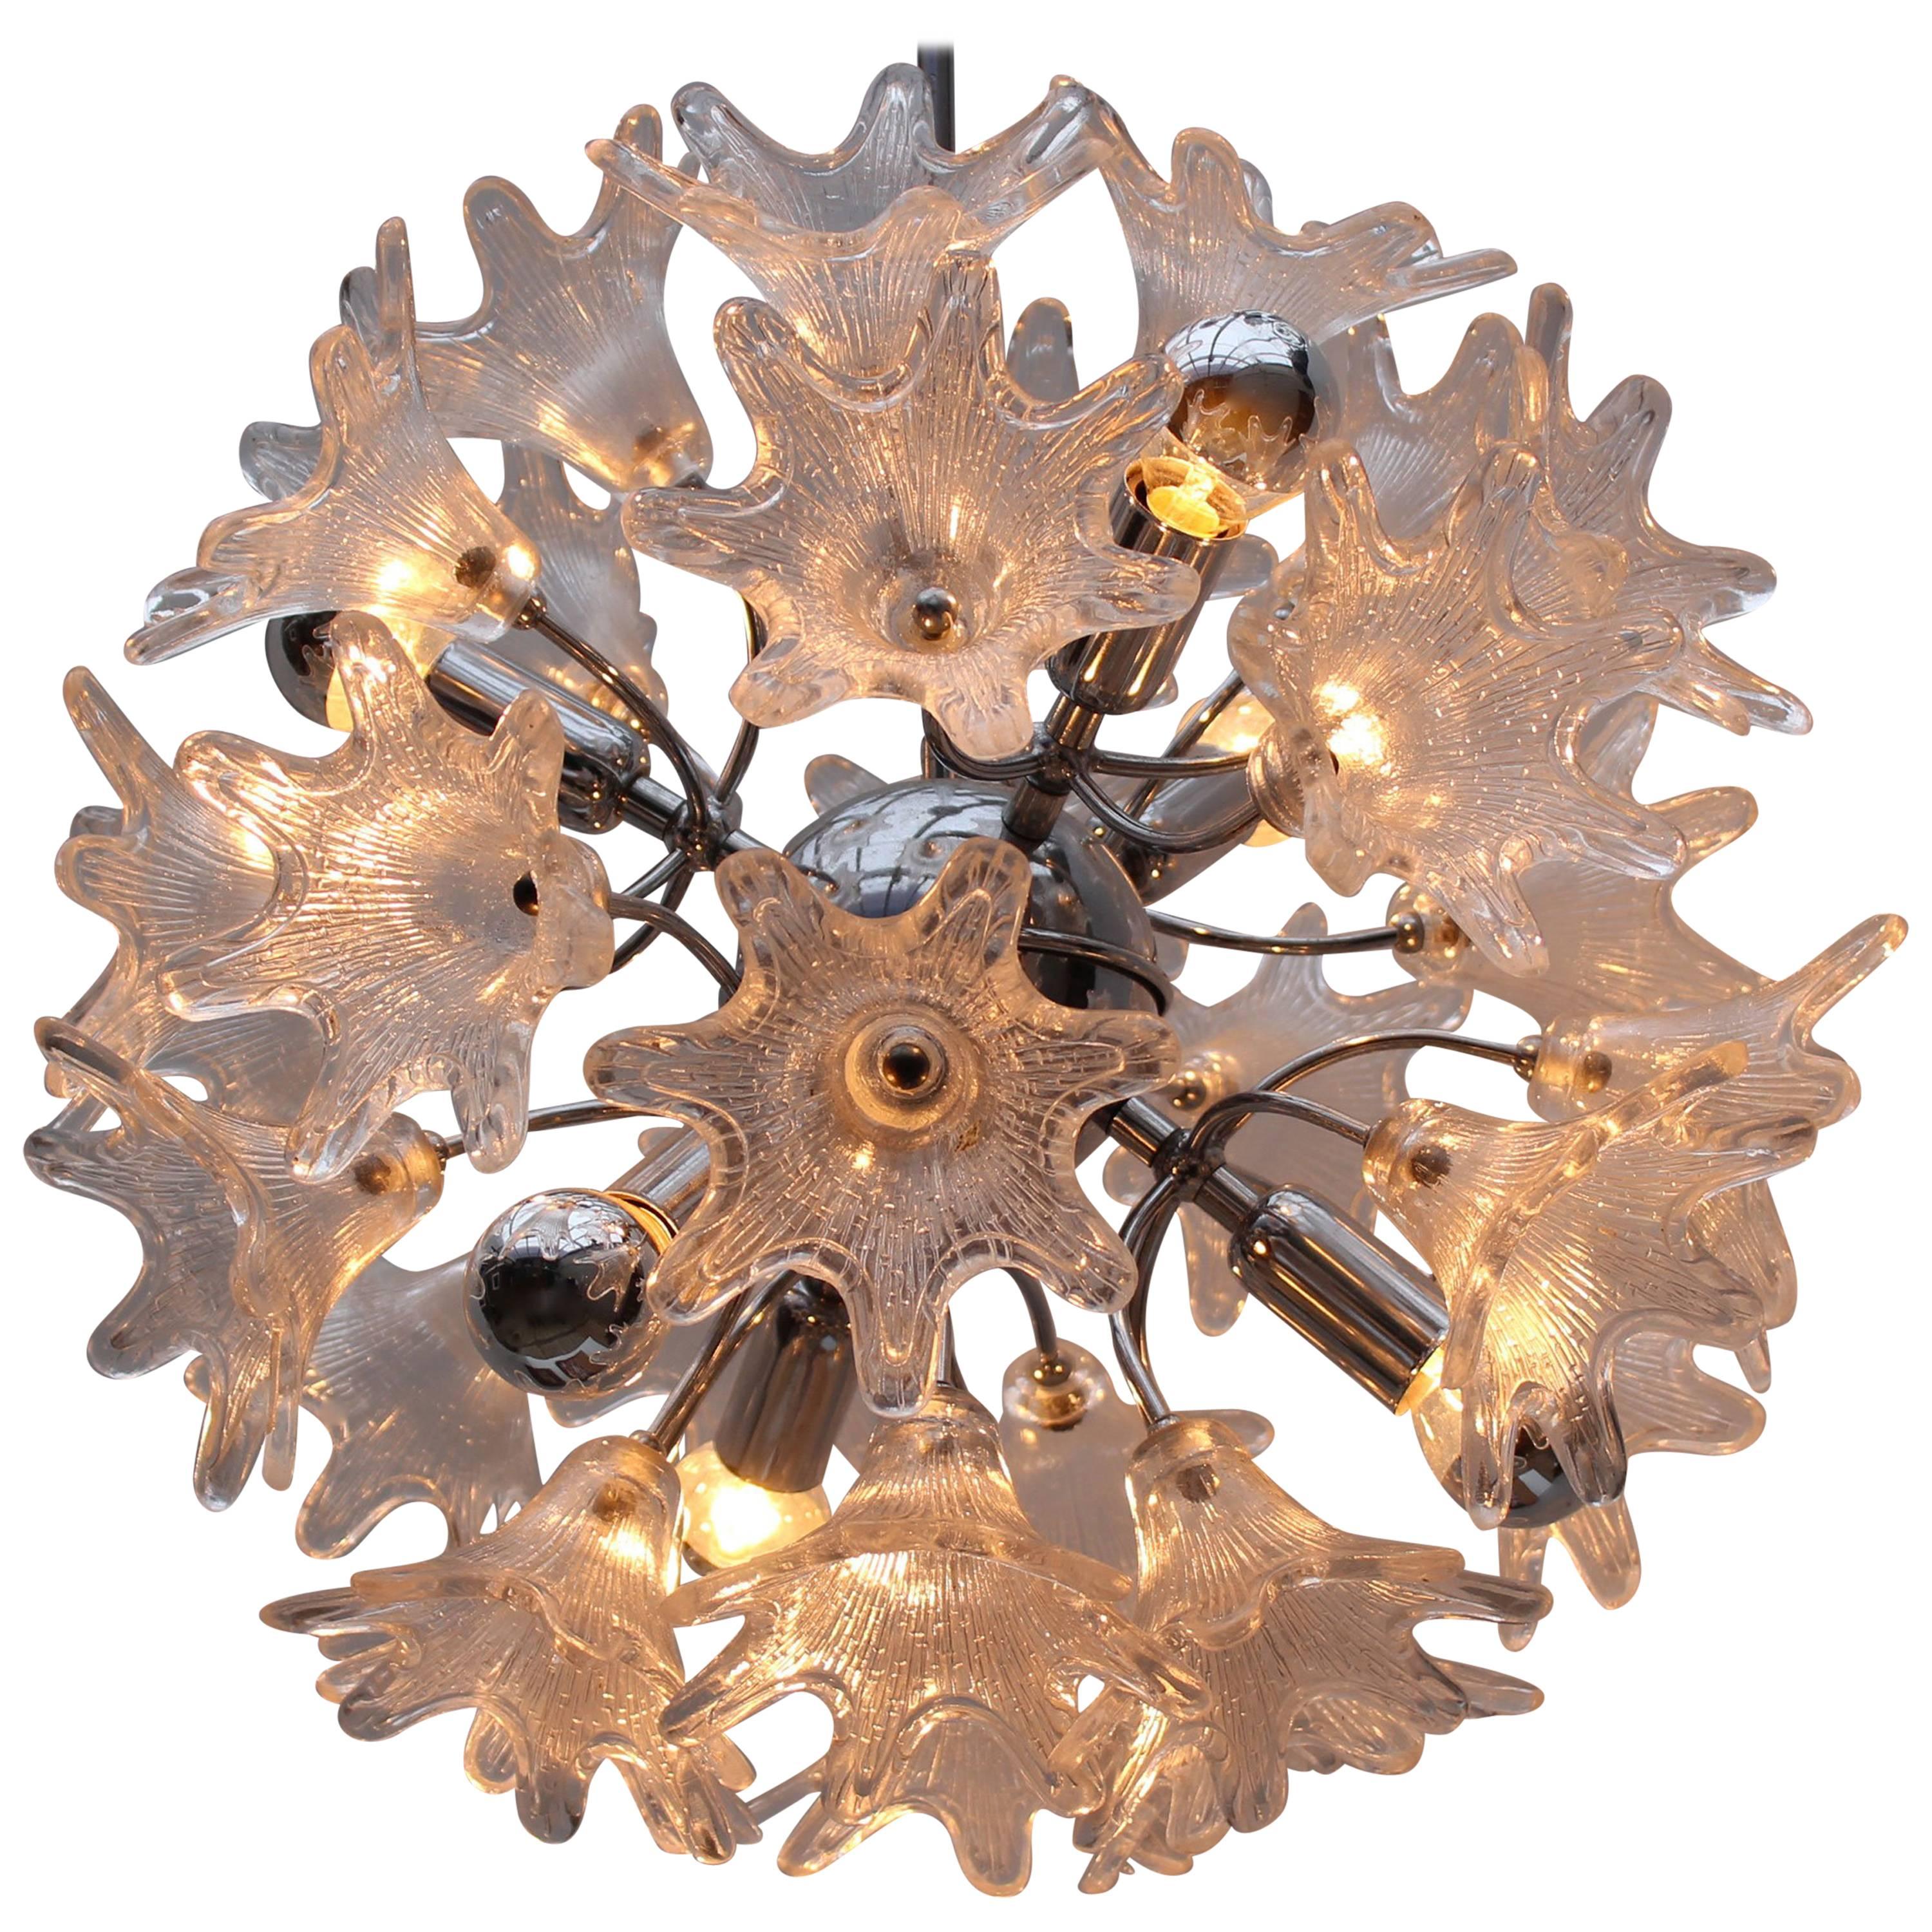 Wonderful midcentury Italian sputnik chandelier designed by Paolo Venini for VeArt in 1960. The chandelier has a stylish chrome frame and 30 Murano glass flowers. When lit the light hits the flowers and creates a beautiful sight.
This chandelier